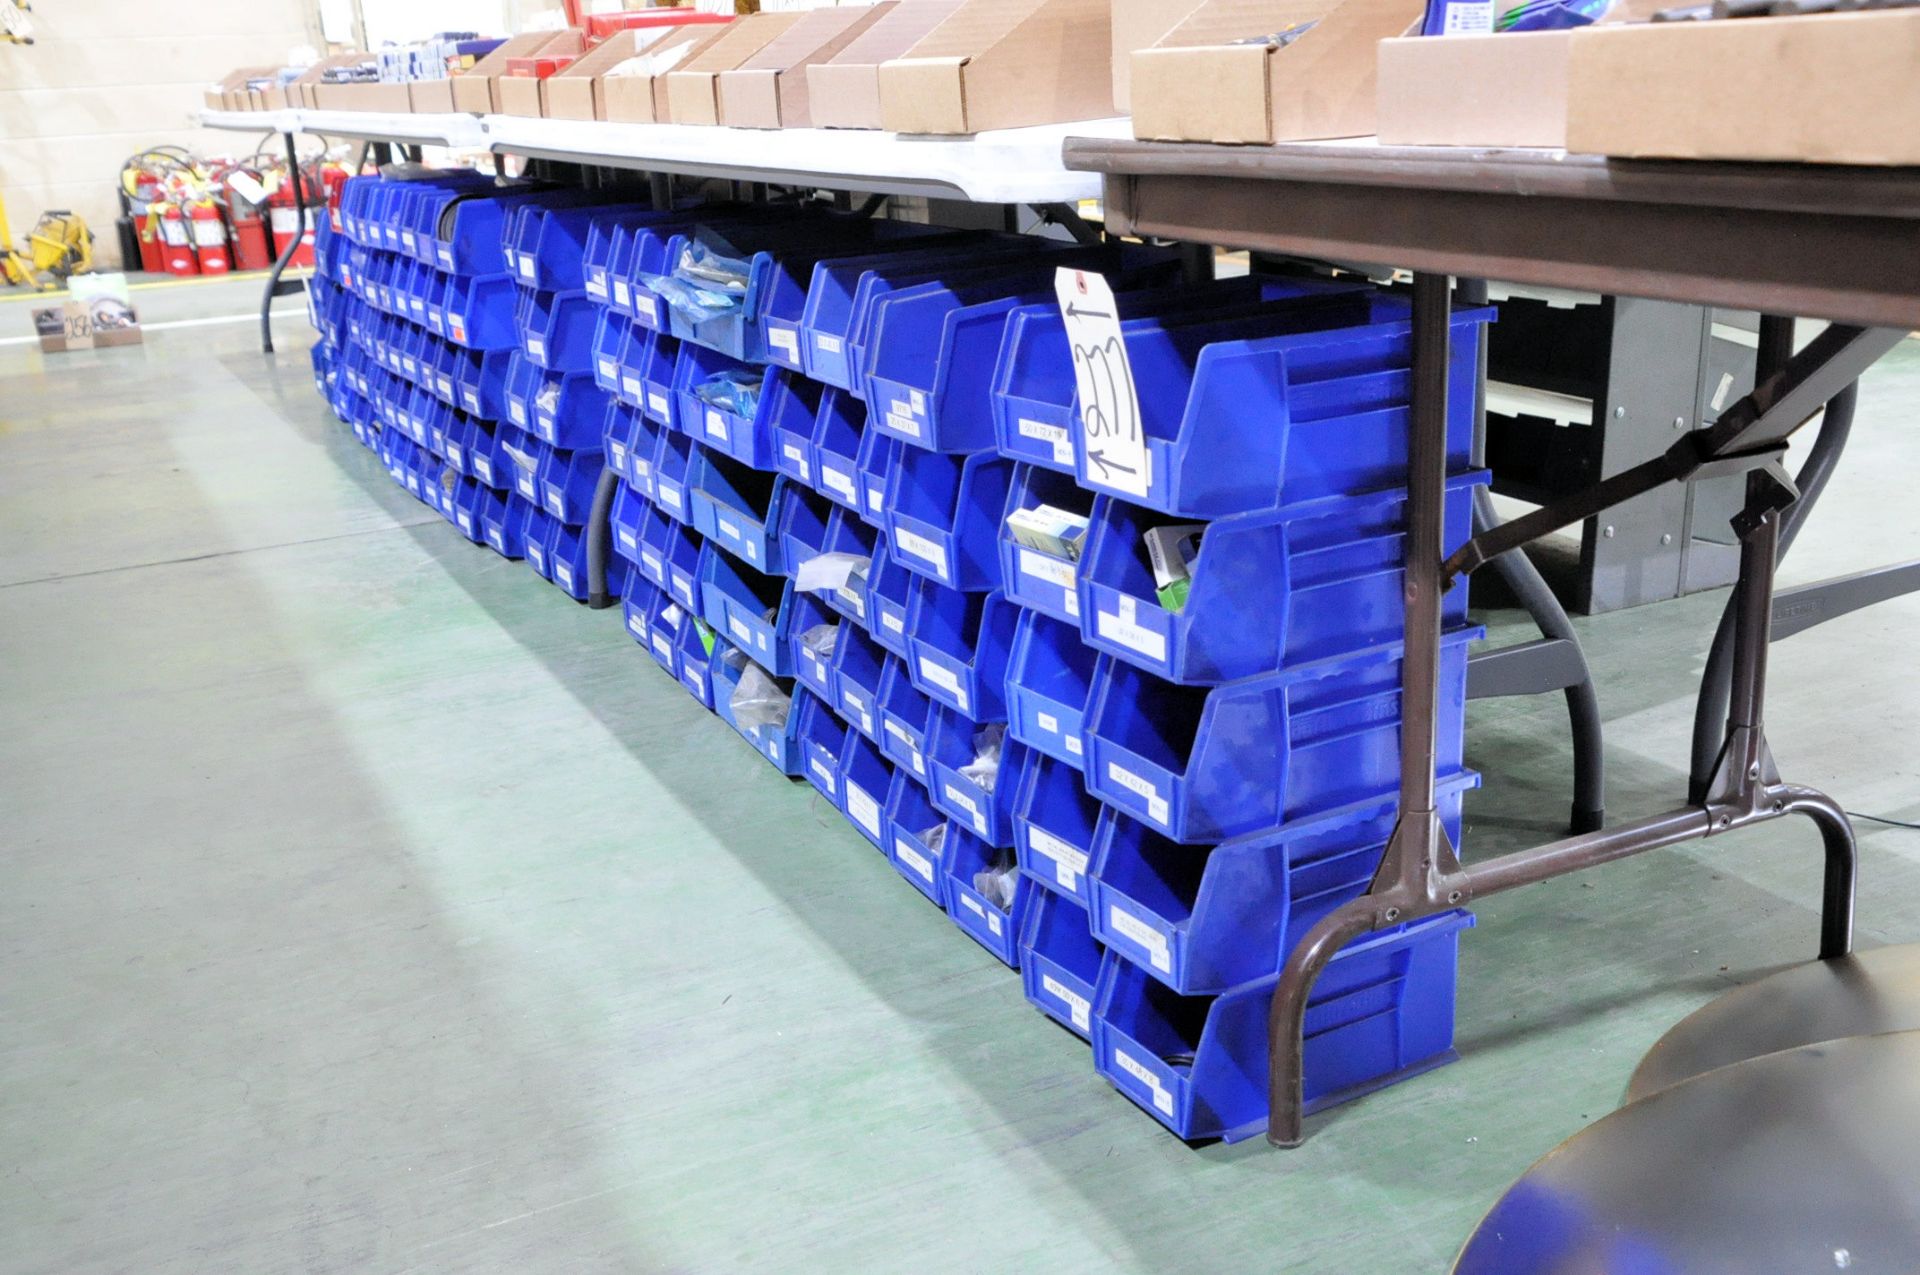 Lot-Various Bearing Seals in Blue Parts Bins on Floor Under (3) Tables, (E-3) - Image 3 of 6